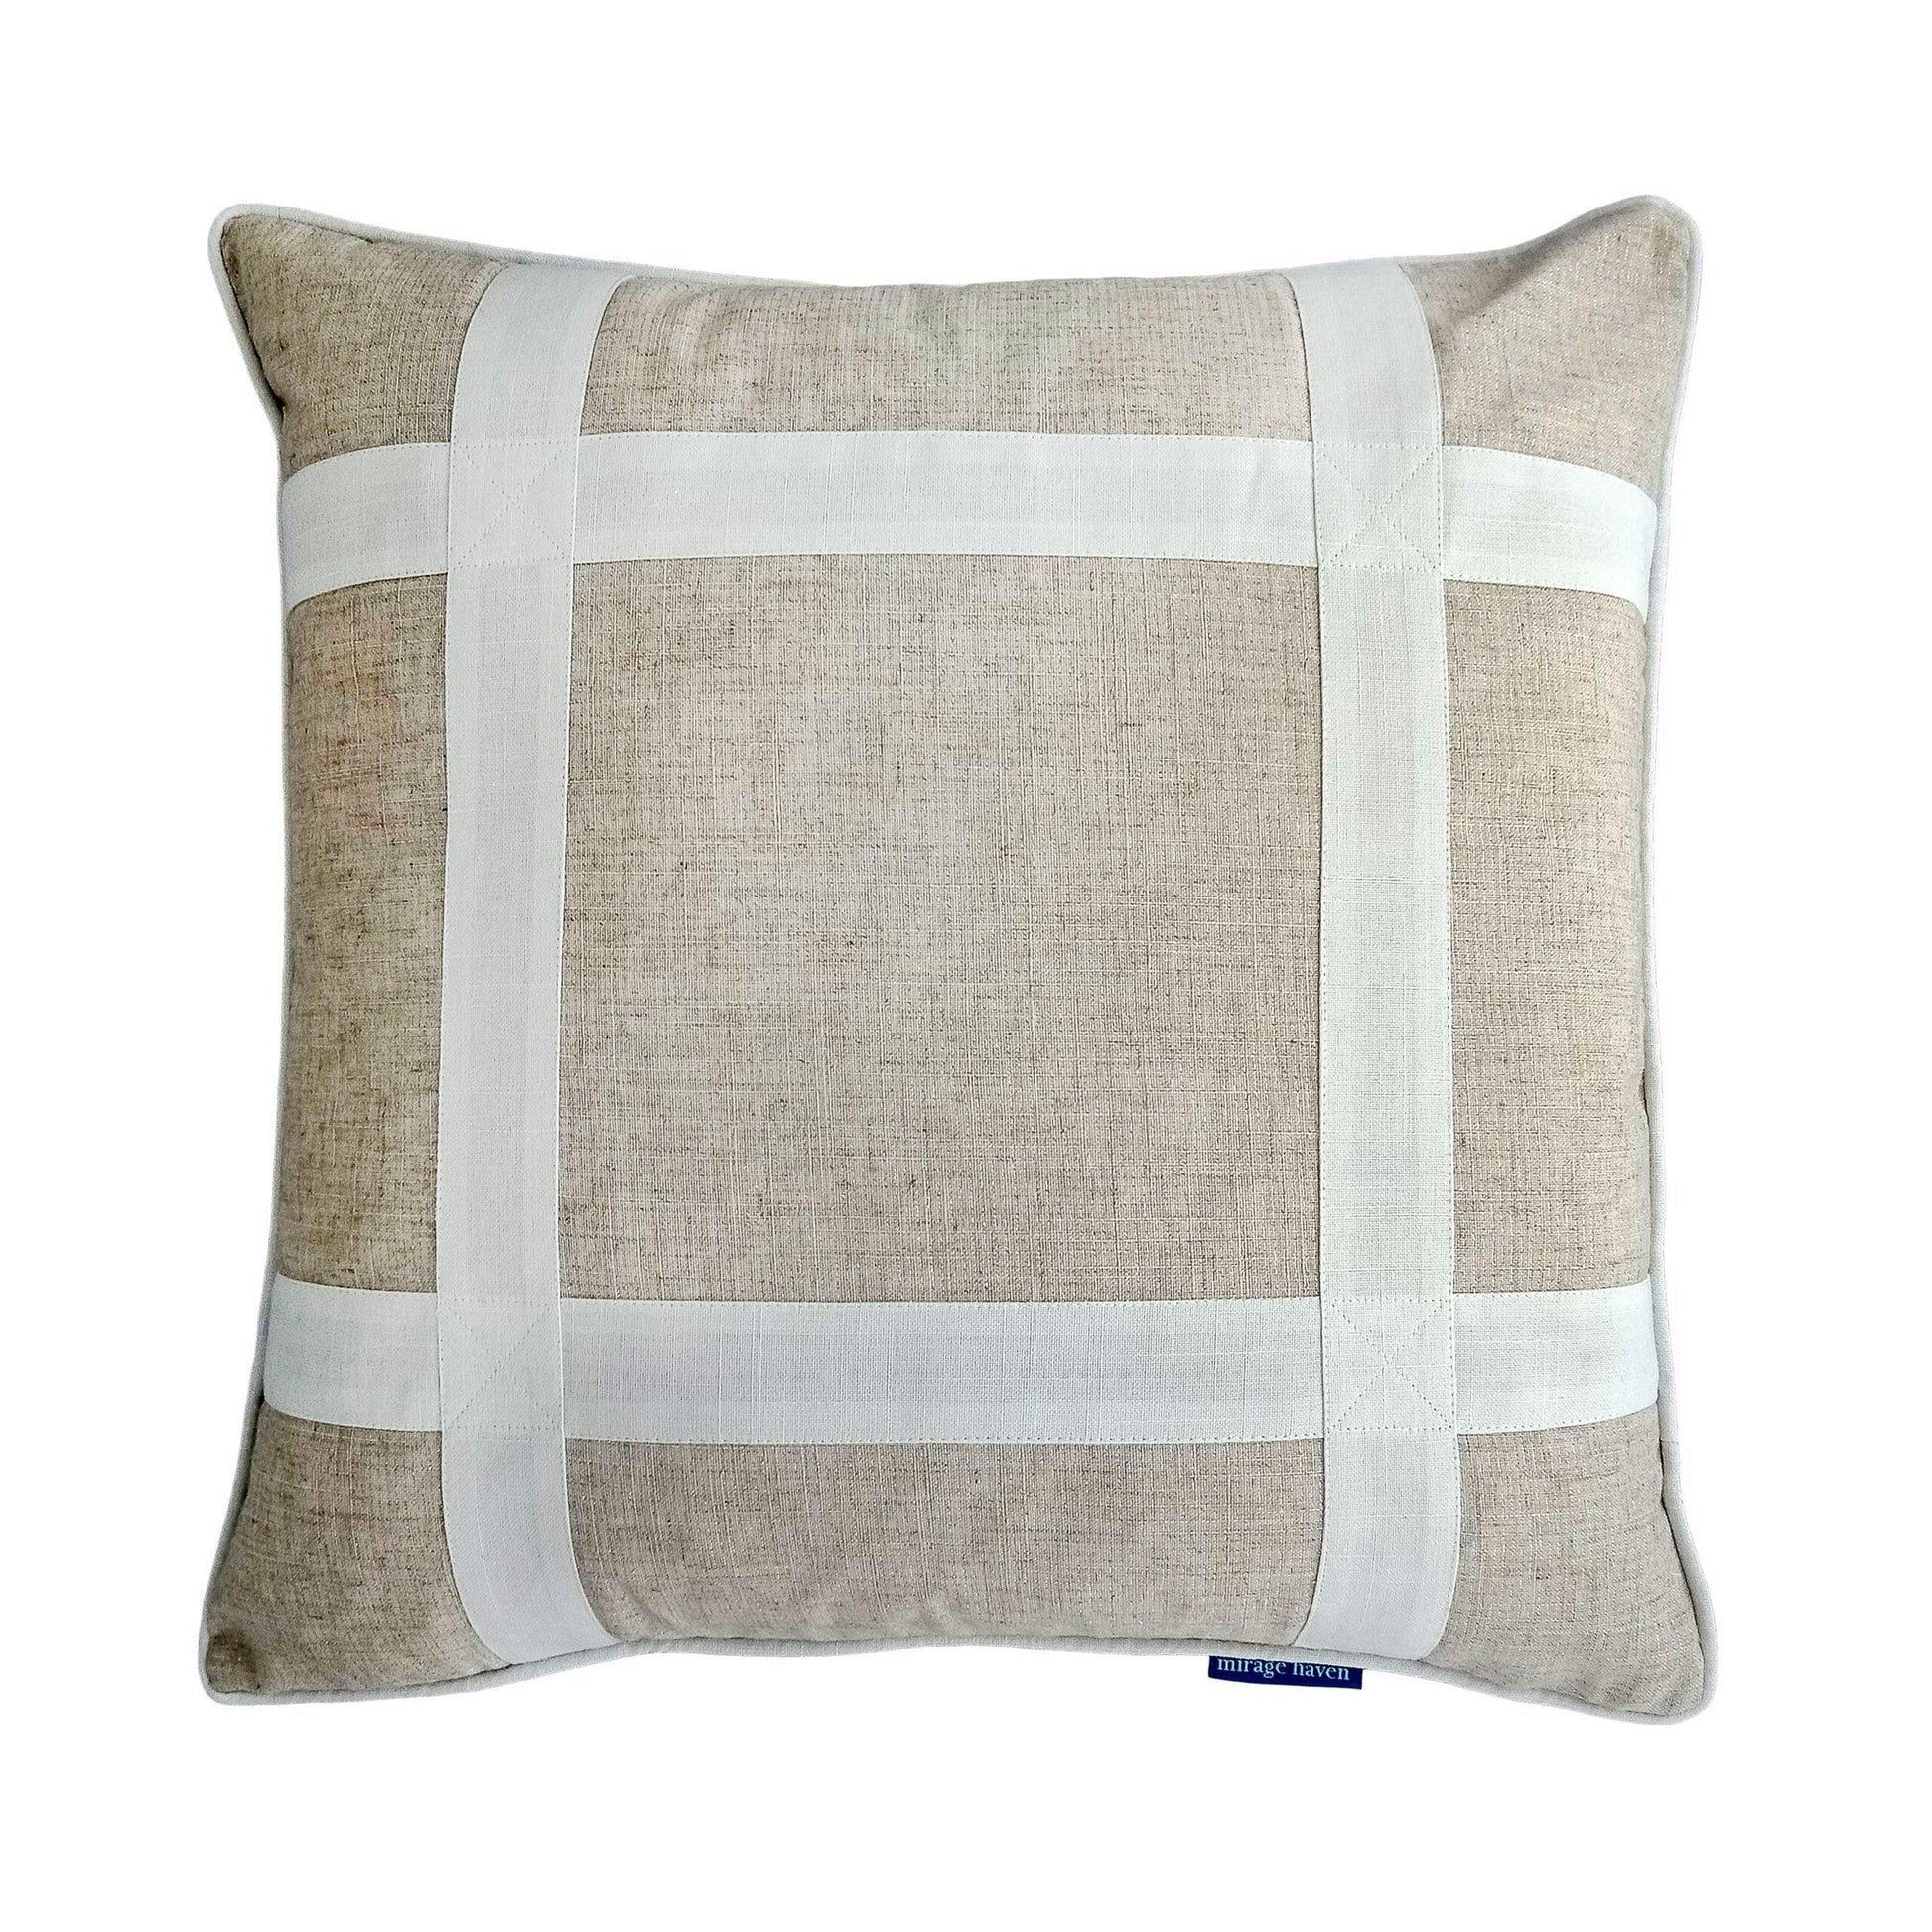 EASTWOOD Silver Jute and White Criss Cross Cushion Cover 50 cm by 50 cm